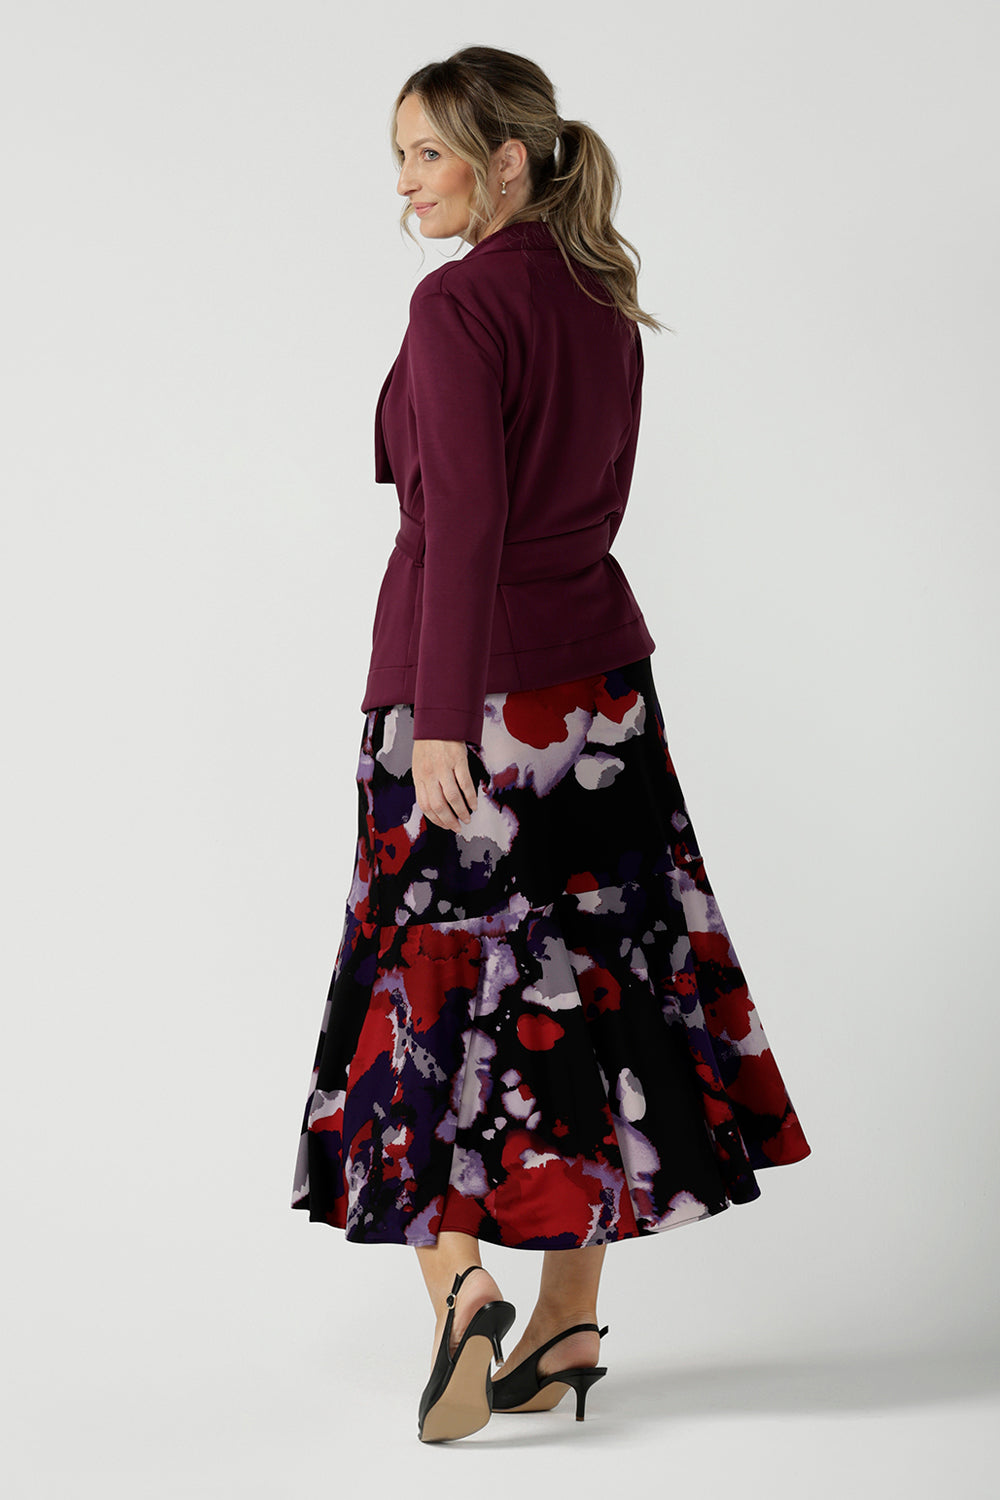 Back view of a size 10 woman wears the Lyndon Jacket in Wine a made in Australia jacket in comfortable and easy care modal fabric. Made in Australia for women size 8 - 24. Styled back with a Berit skirt in the Fitzroy print.